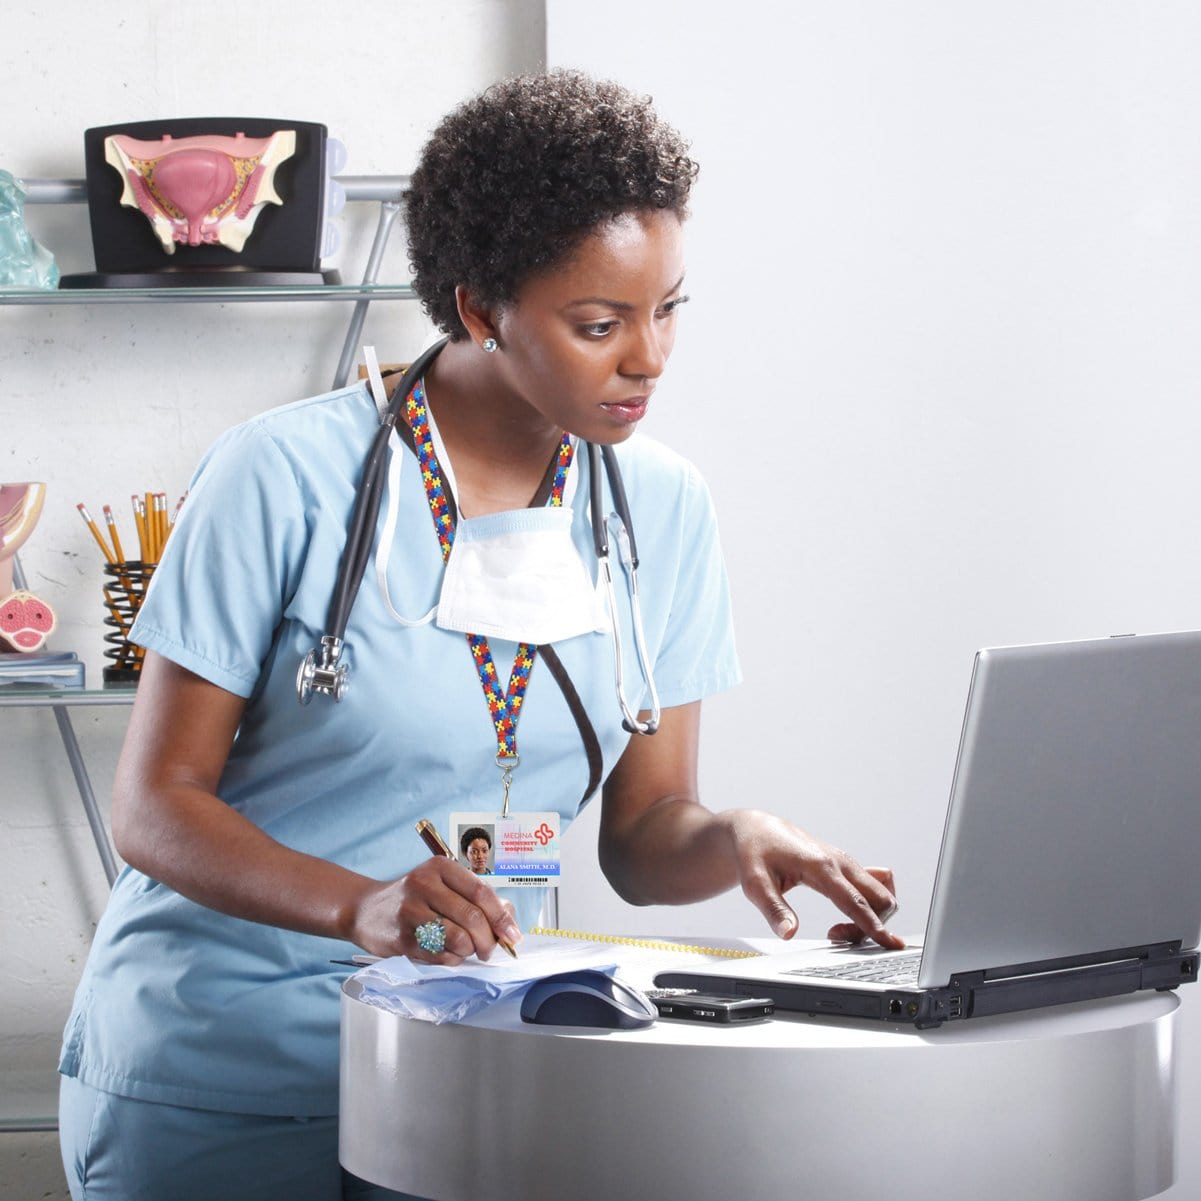 A healthcare professional in scrubs and a stethoscope, wearing an Autism Awareness Flat Breakaway Lanyard With Swivel Hook (2138-5281, 2138-5282), works on a laptop and writes on a notepad in a medical office.